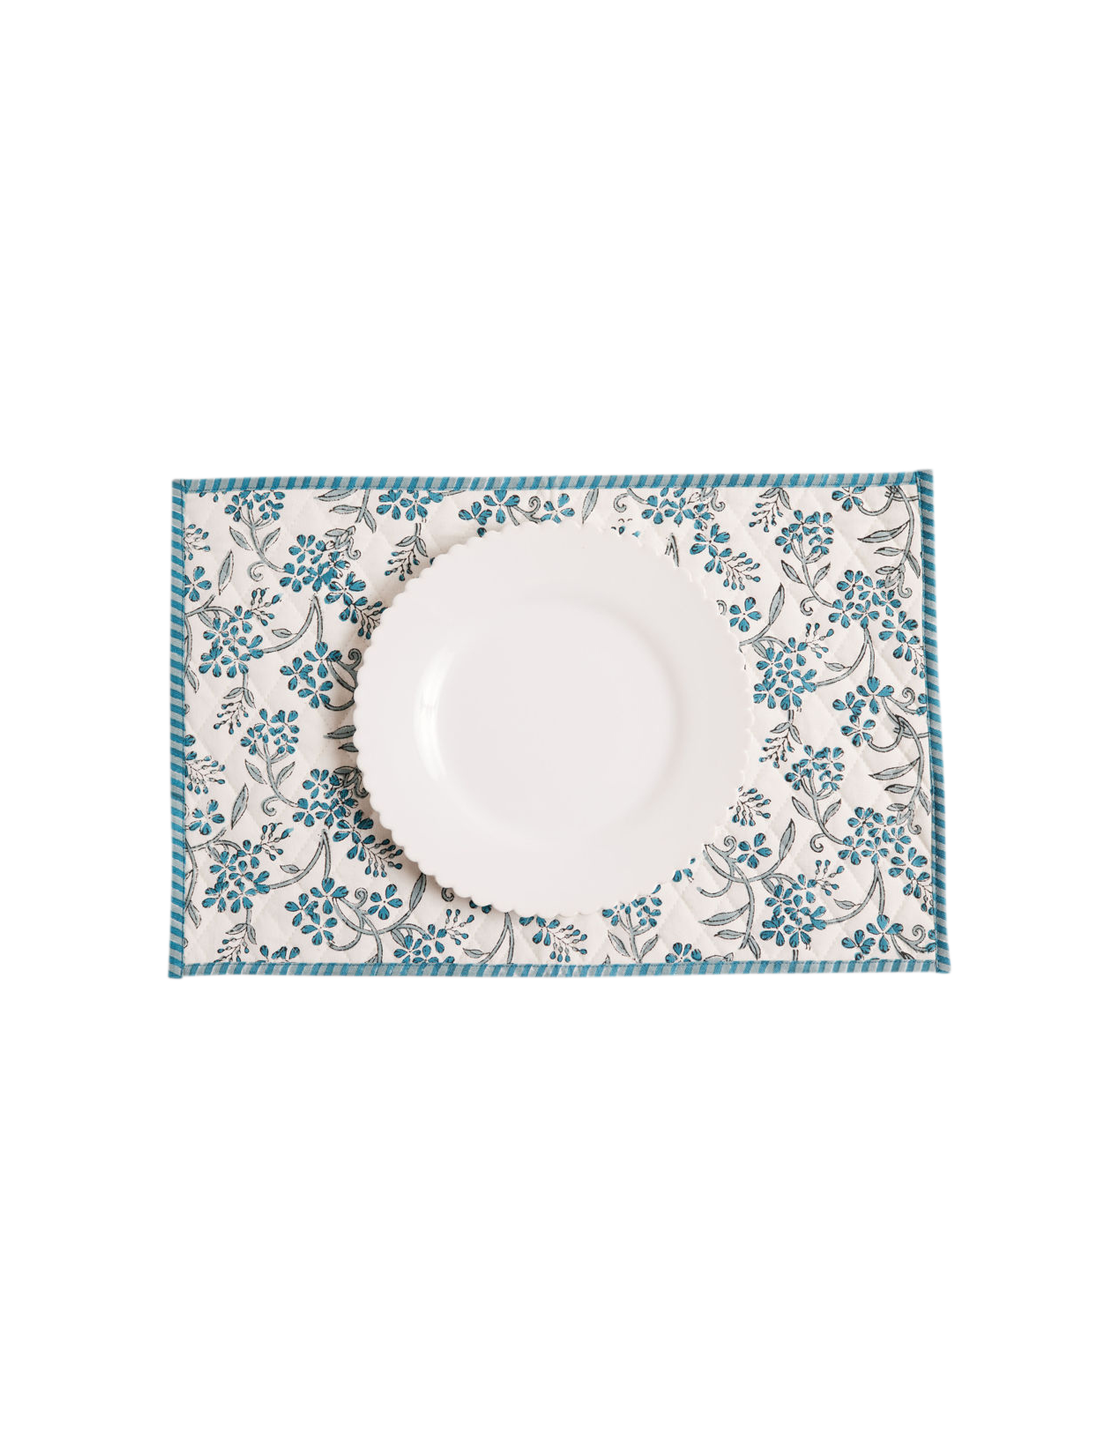 Sanibel Quilted Placemat Set